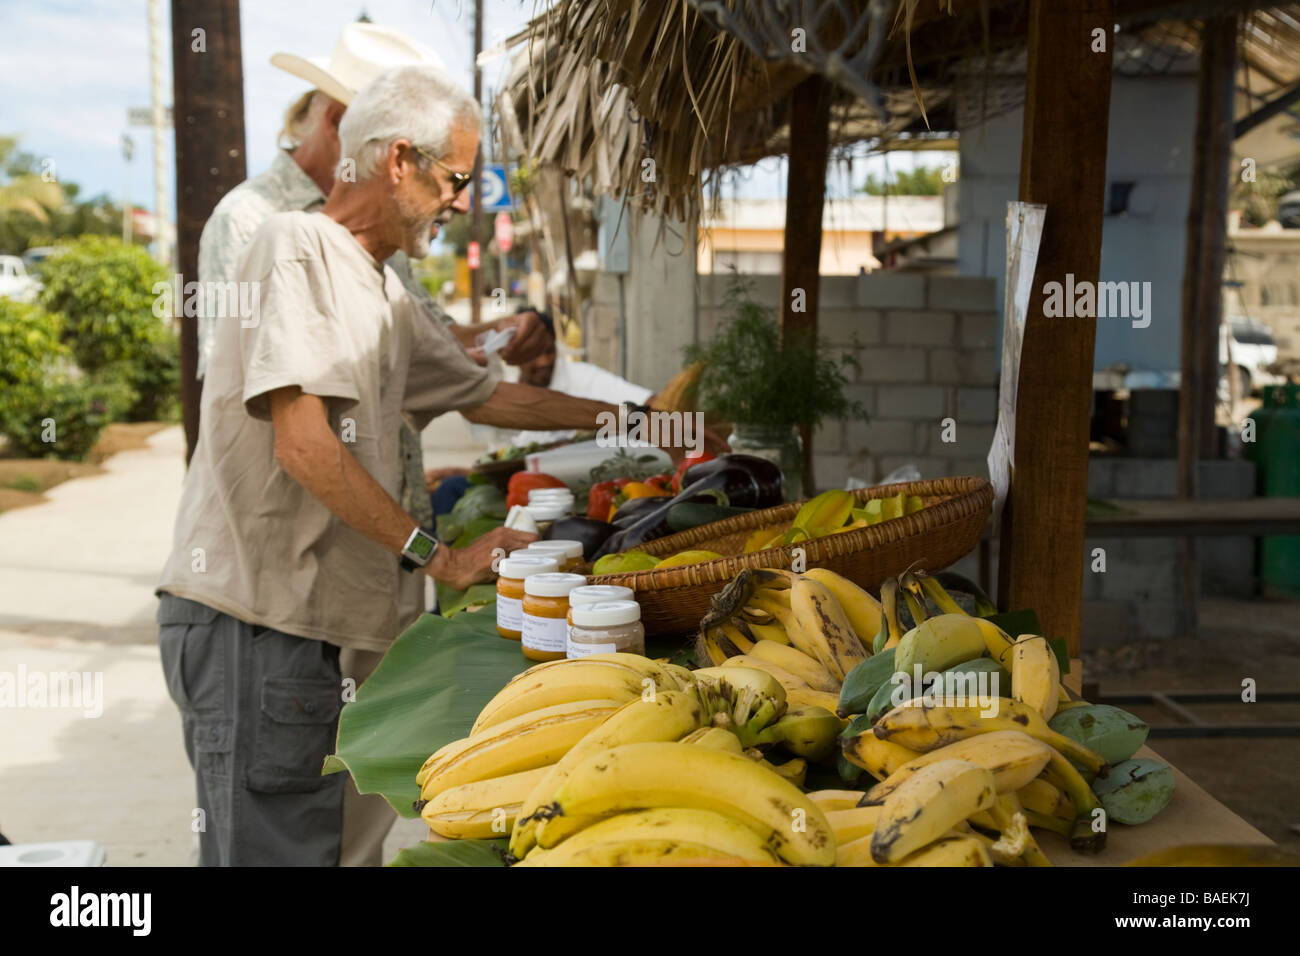 MEXICO Todos Santos Male customer shopping at roadside stand selling organic fruits and vegetables in small Mexican town bananas Stock Photo